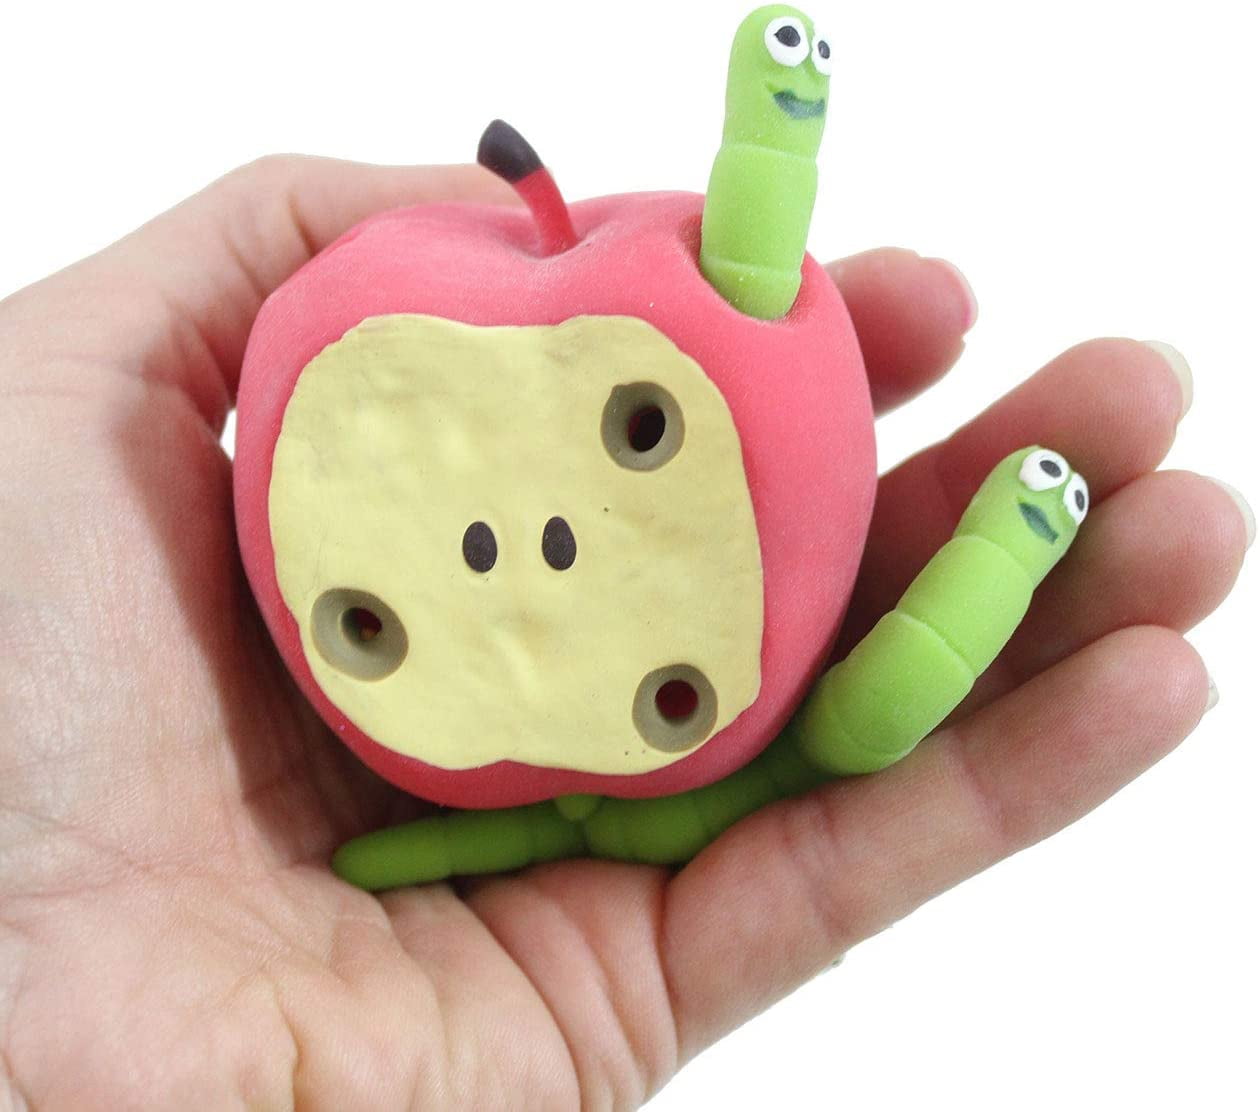 Stretchy Apple and Worms Toy Stress Relief Fidget Fiddle Anxiety Stim ASD SEN 